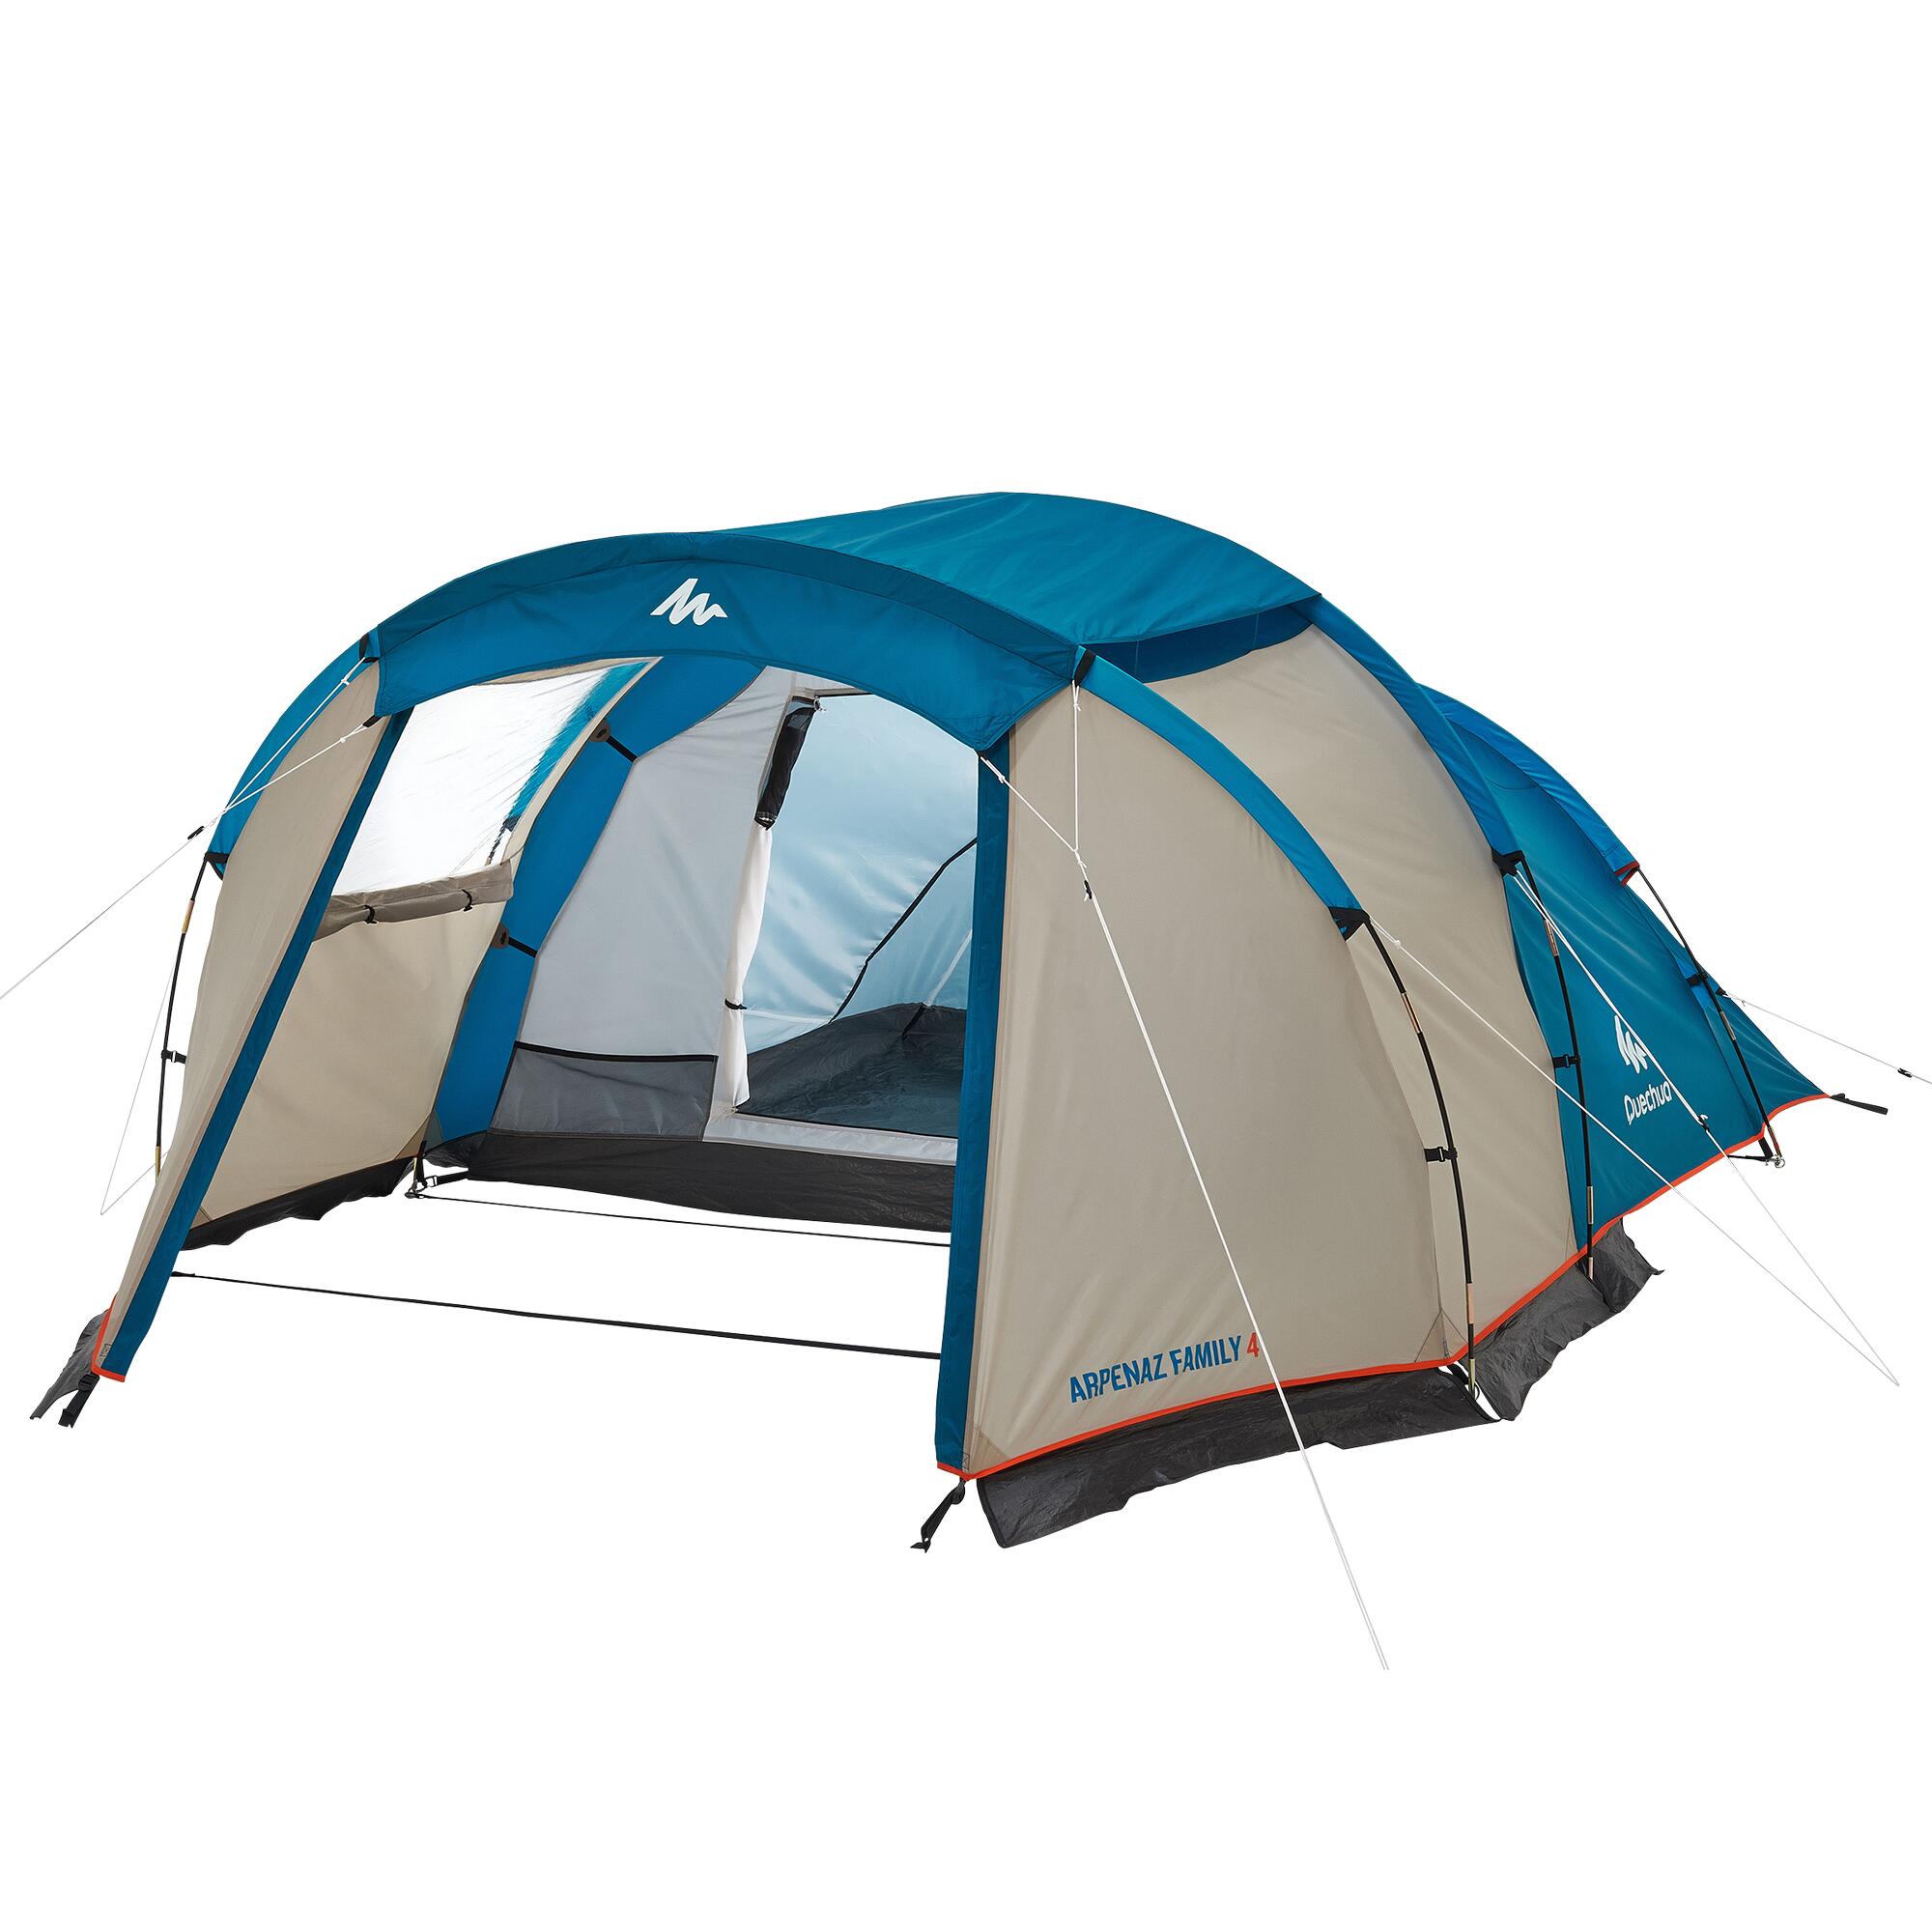 QUECHUA Camping tent with poles - Arpenaz 4 - 4 Person - 1 Bedroom